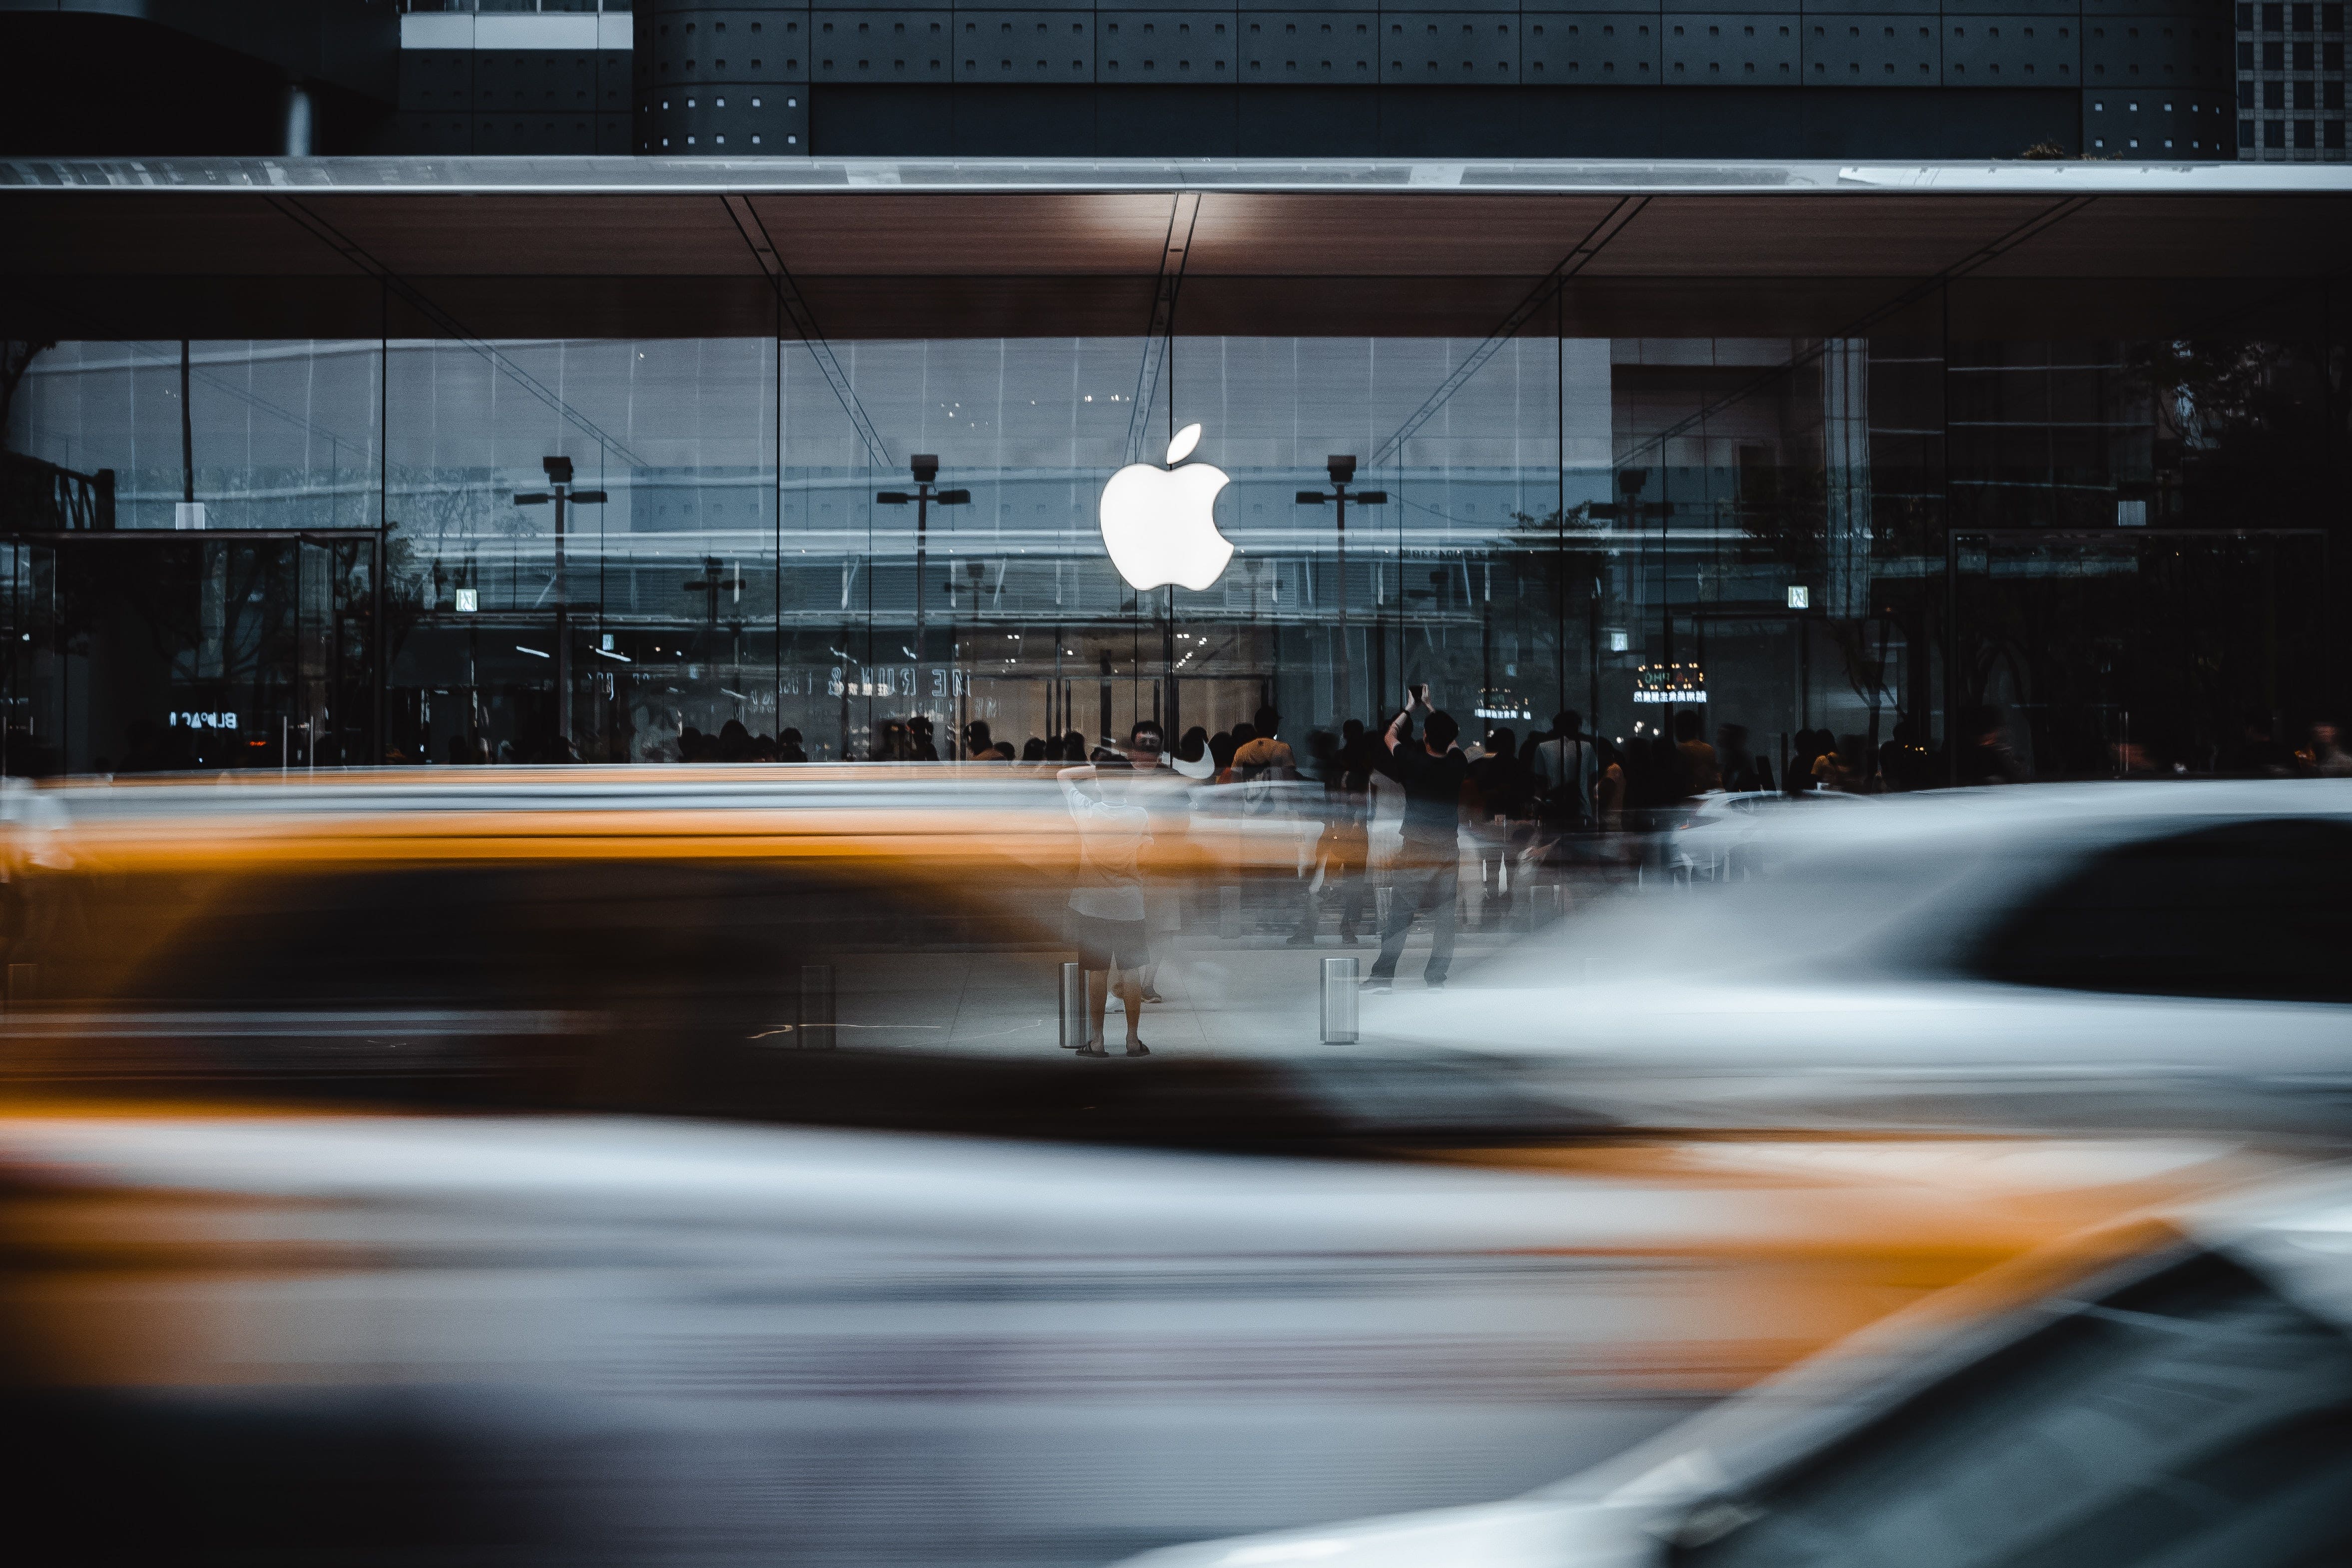 Apple Car Goes Full-Throttle Under Kevin Lynch With An 'Ambitious And Aggressive Plan:' Gurman